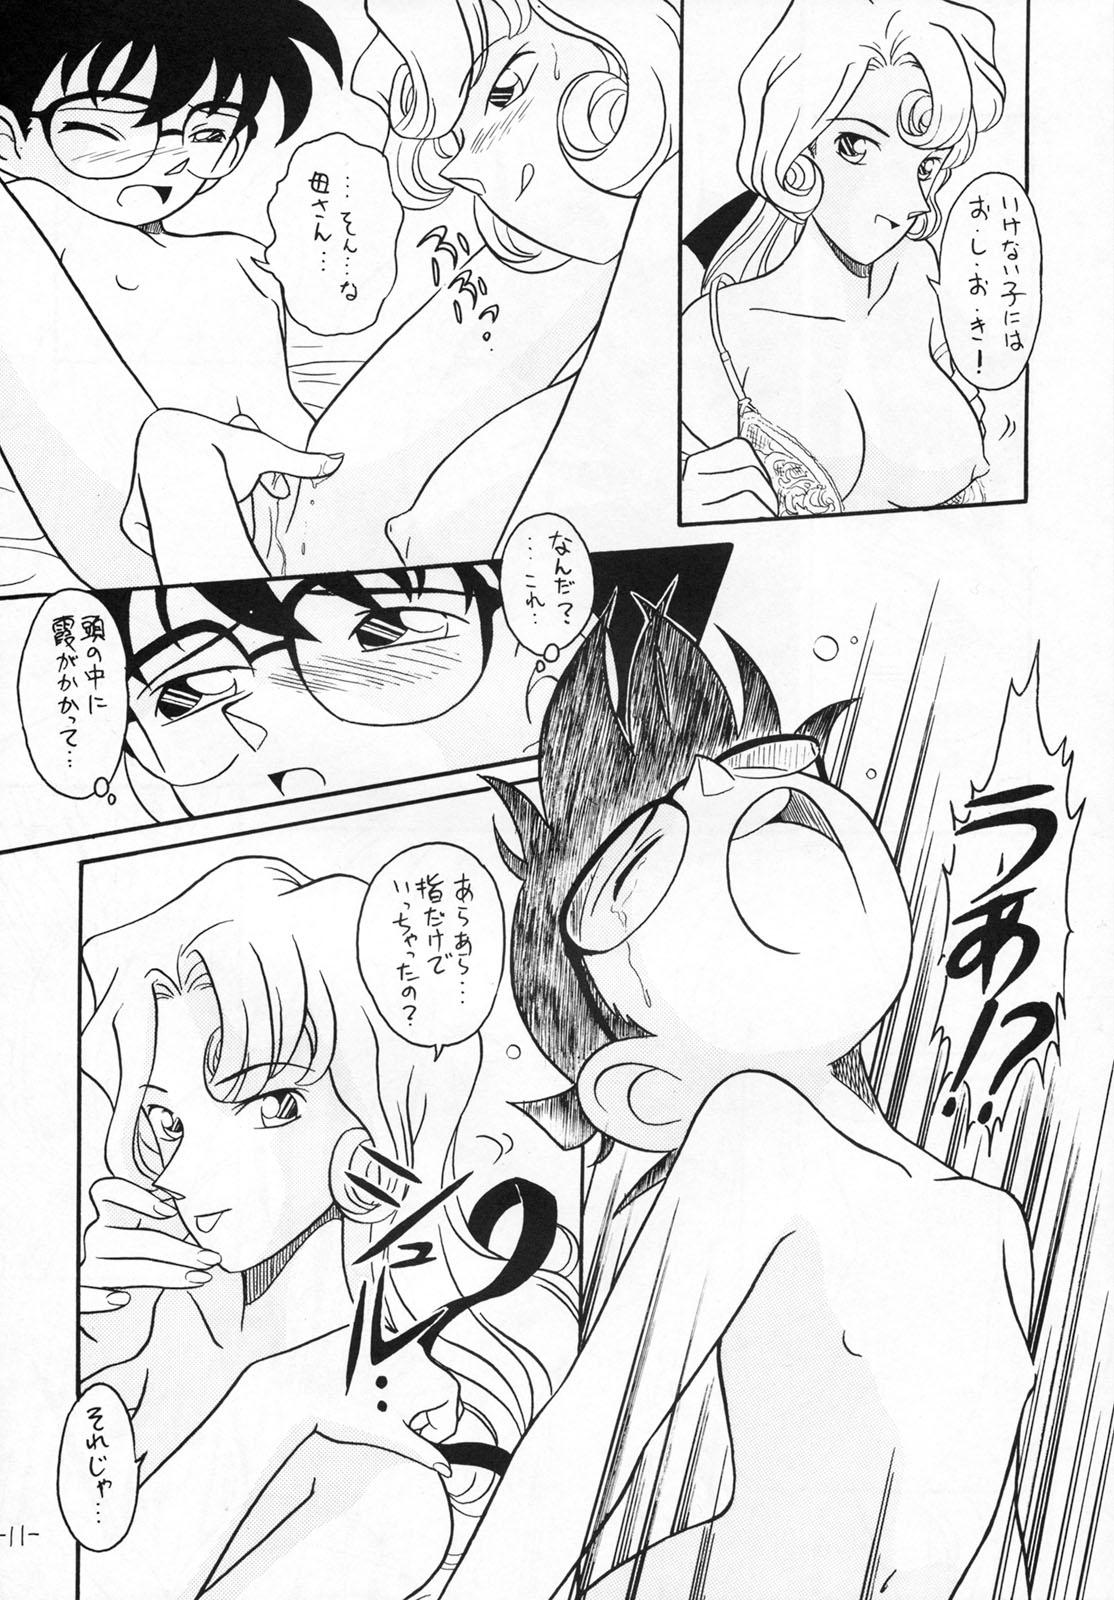 Ex Girlfriend OUT SIDE 9 - Detective conan Exposed - Page 10